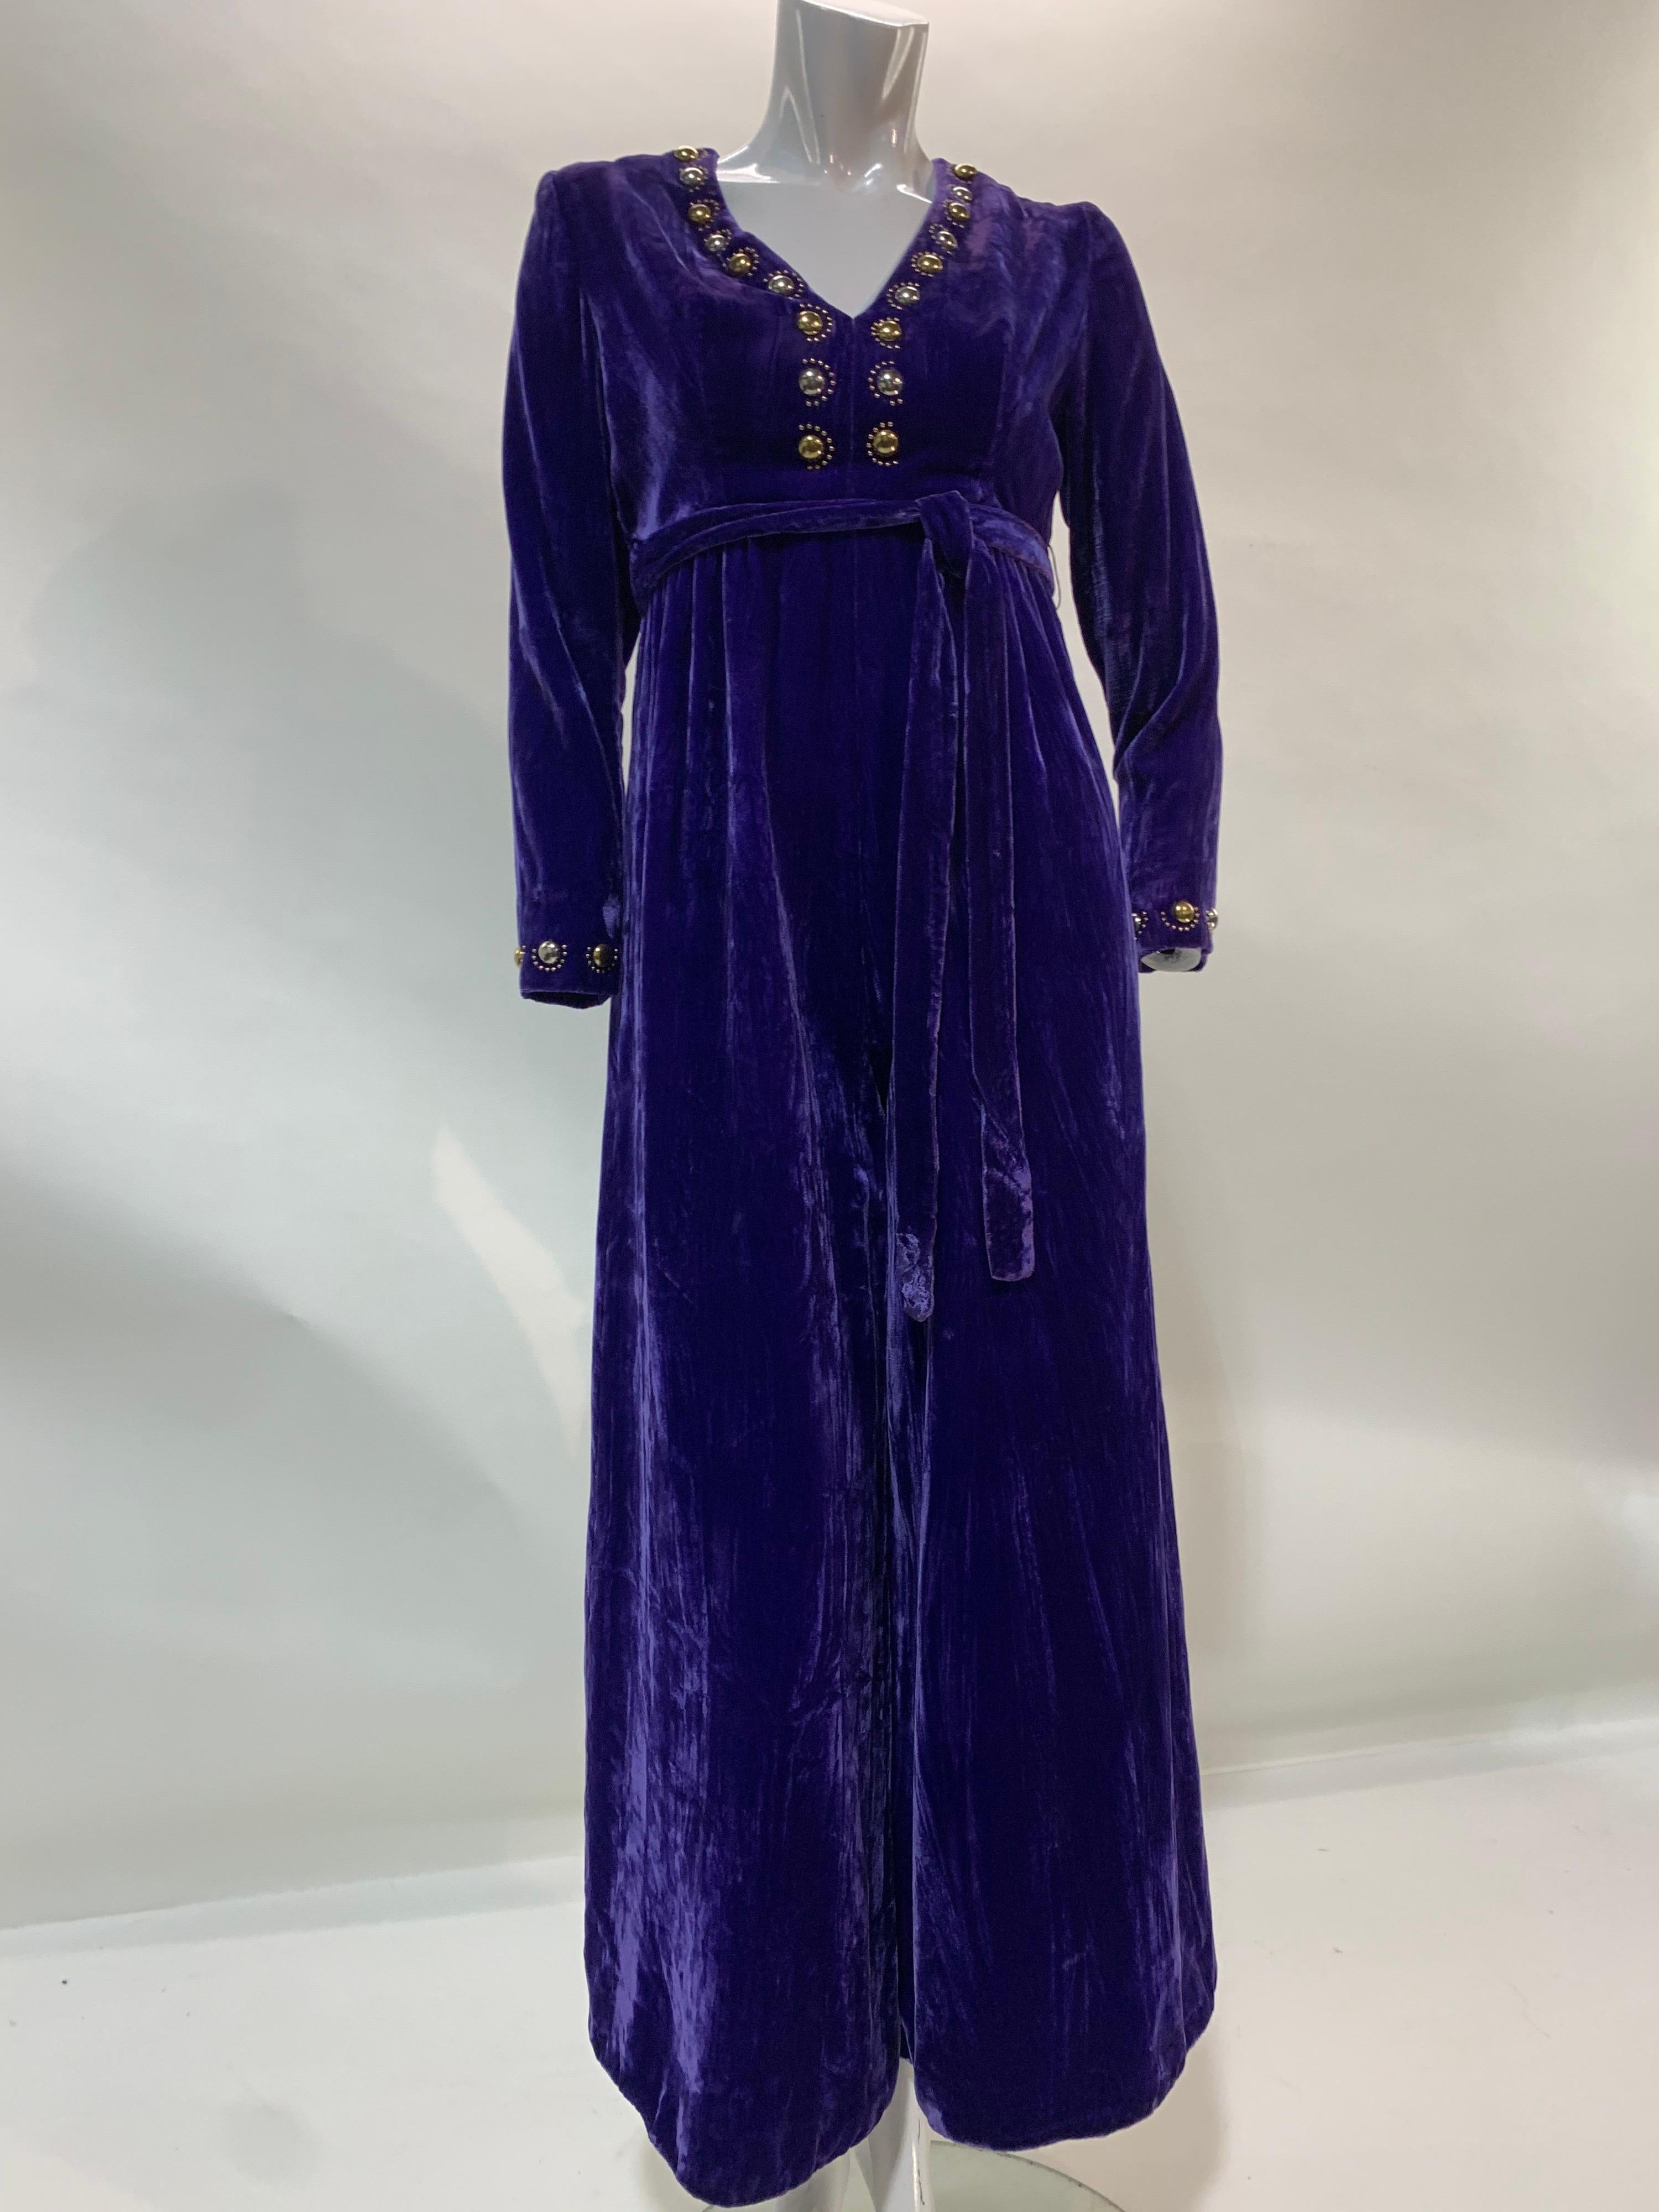 A 1960s Futura Couture vivid purple rayon velvet jumpsuit with gold and silver toned half sphere stud embellishments at neckline and cuffs. Wide flared leg and back zipper. Original belt included. Back zipper. Fully lined. Size 6